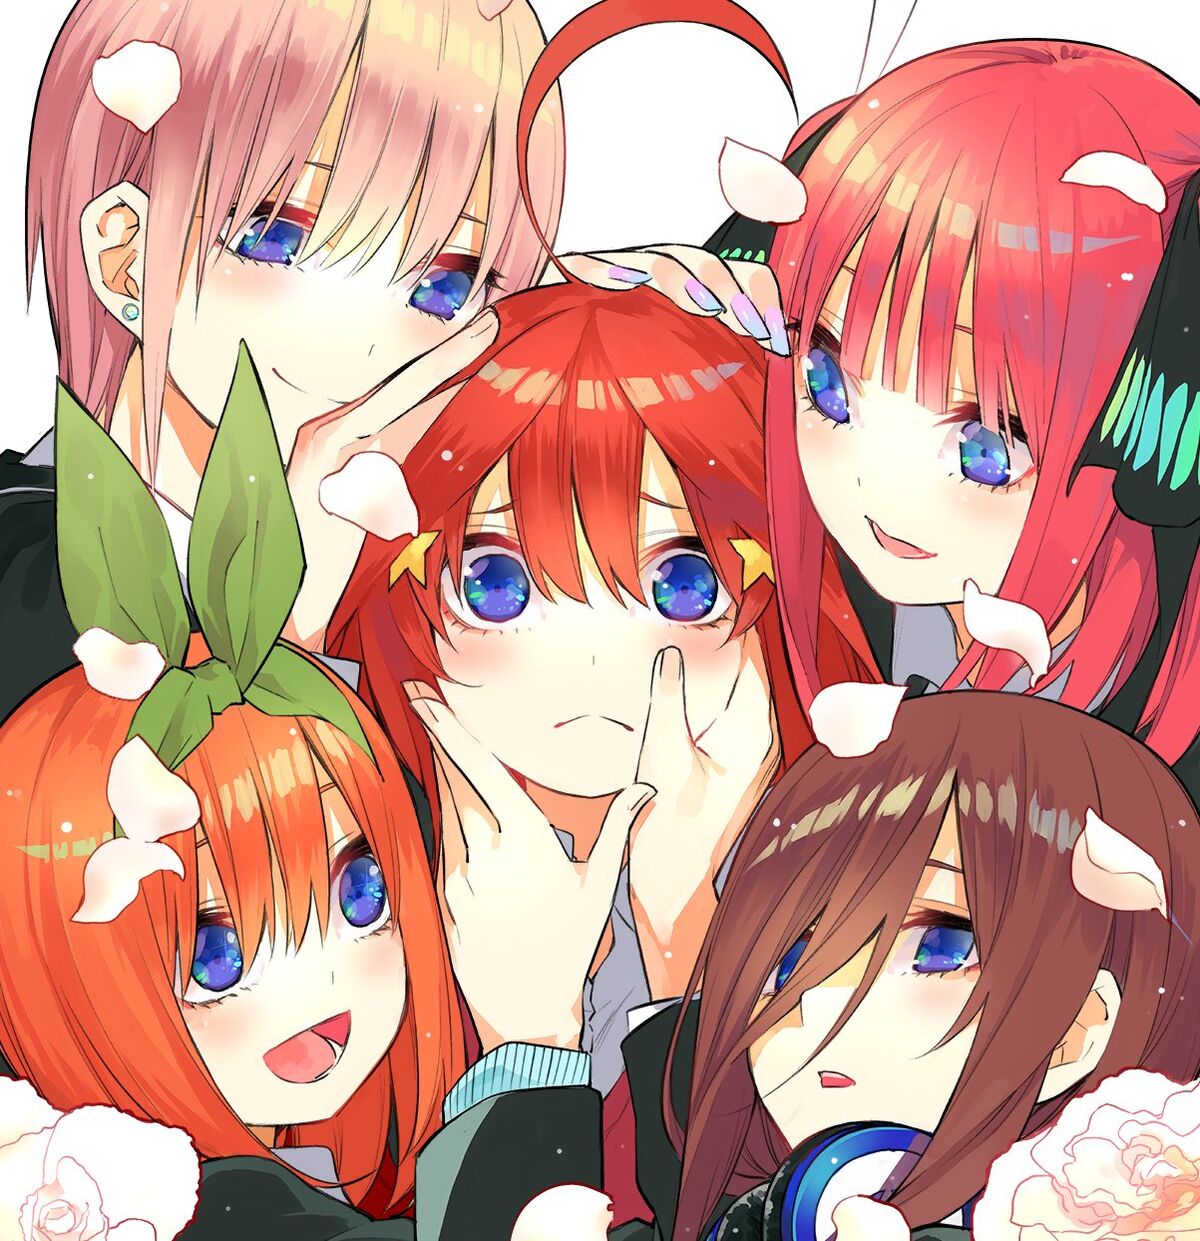 Review: The Quintessential Quintuplets Movie Is a Bittersweet End to the  Story - Anime Corner